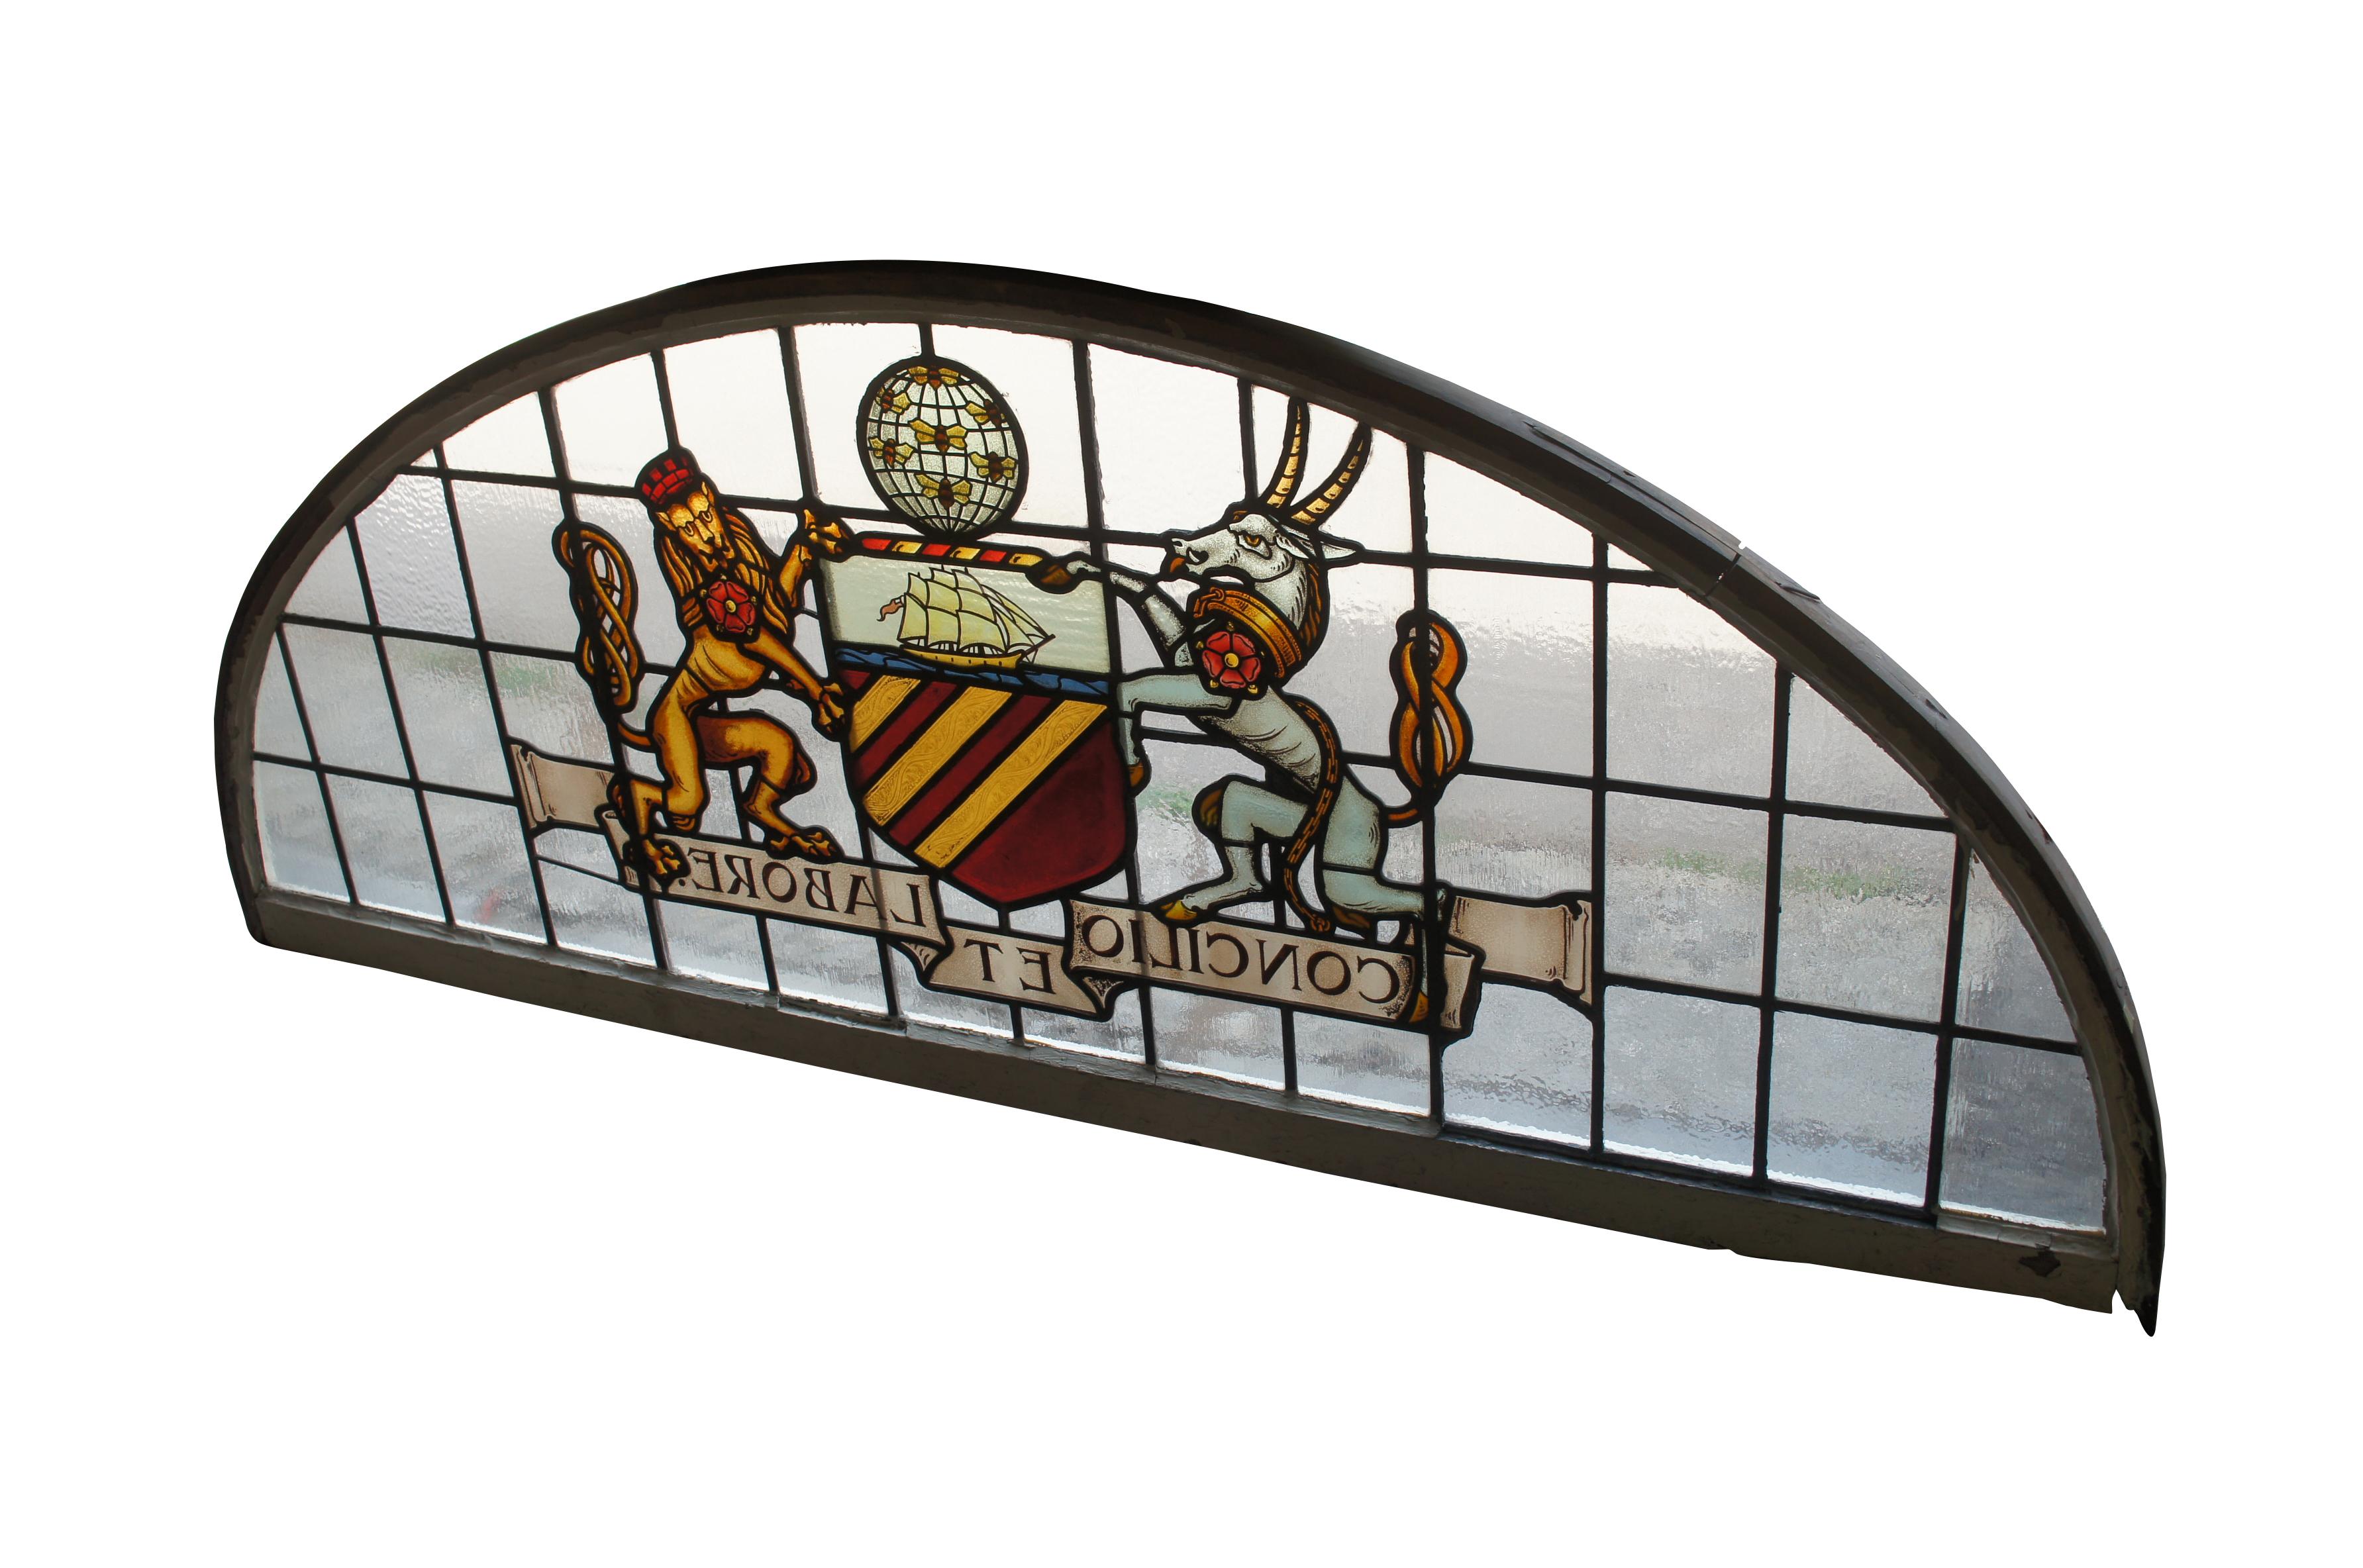 2 Rare Antique Manchester English Stained Glass Palladian Windows Coat of Arms In Good Condition For Sale In Dayton, OH